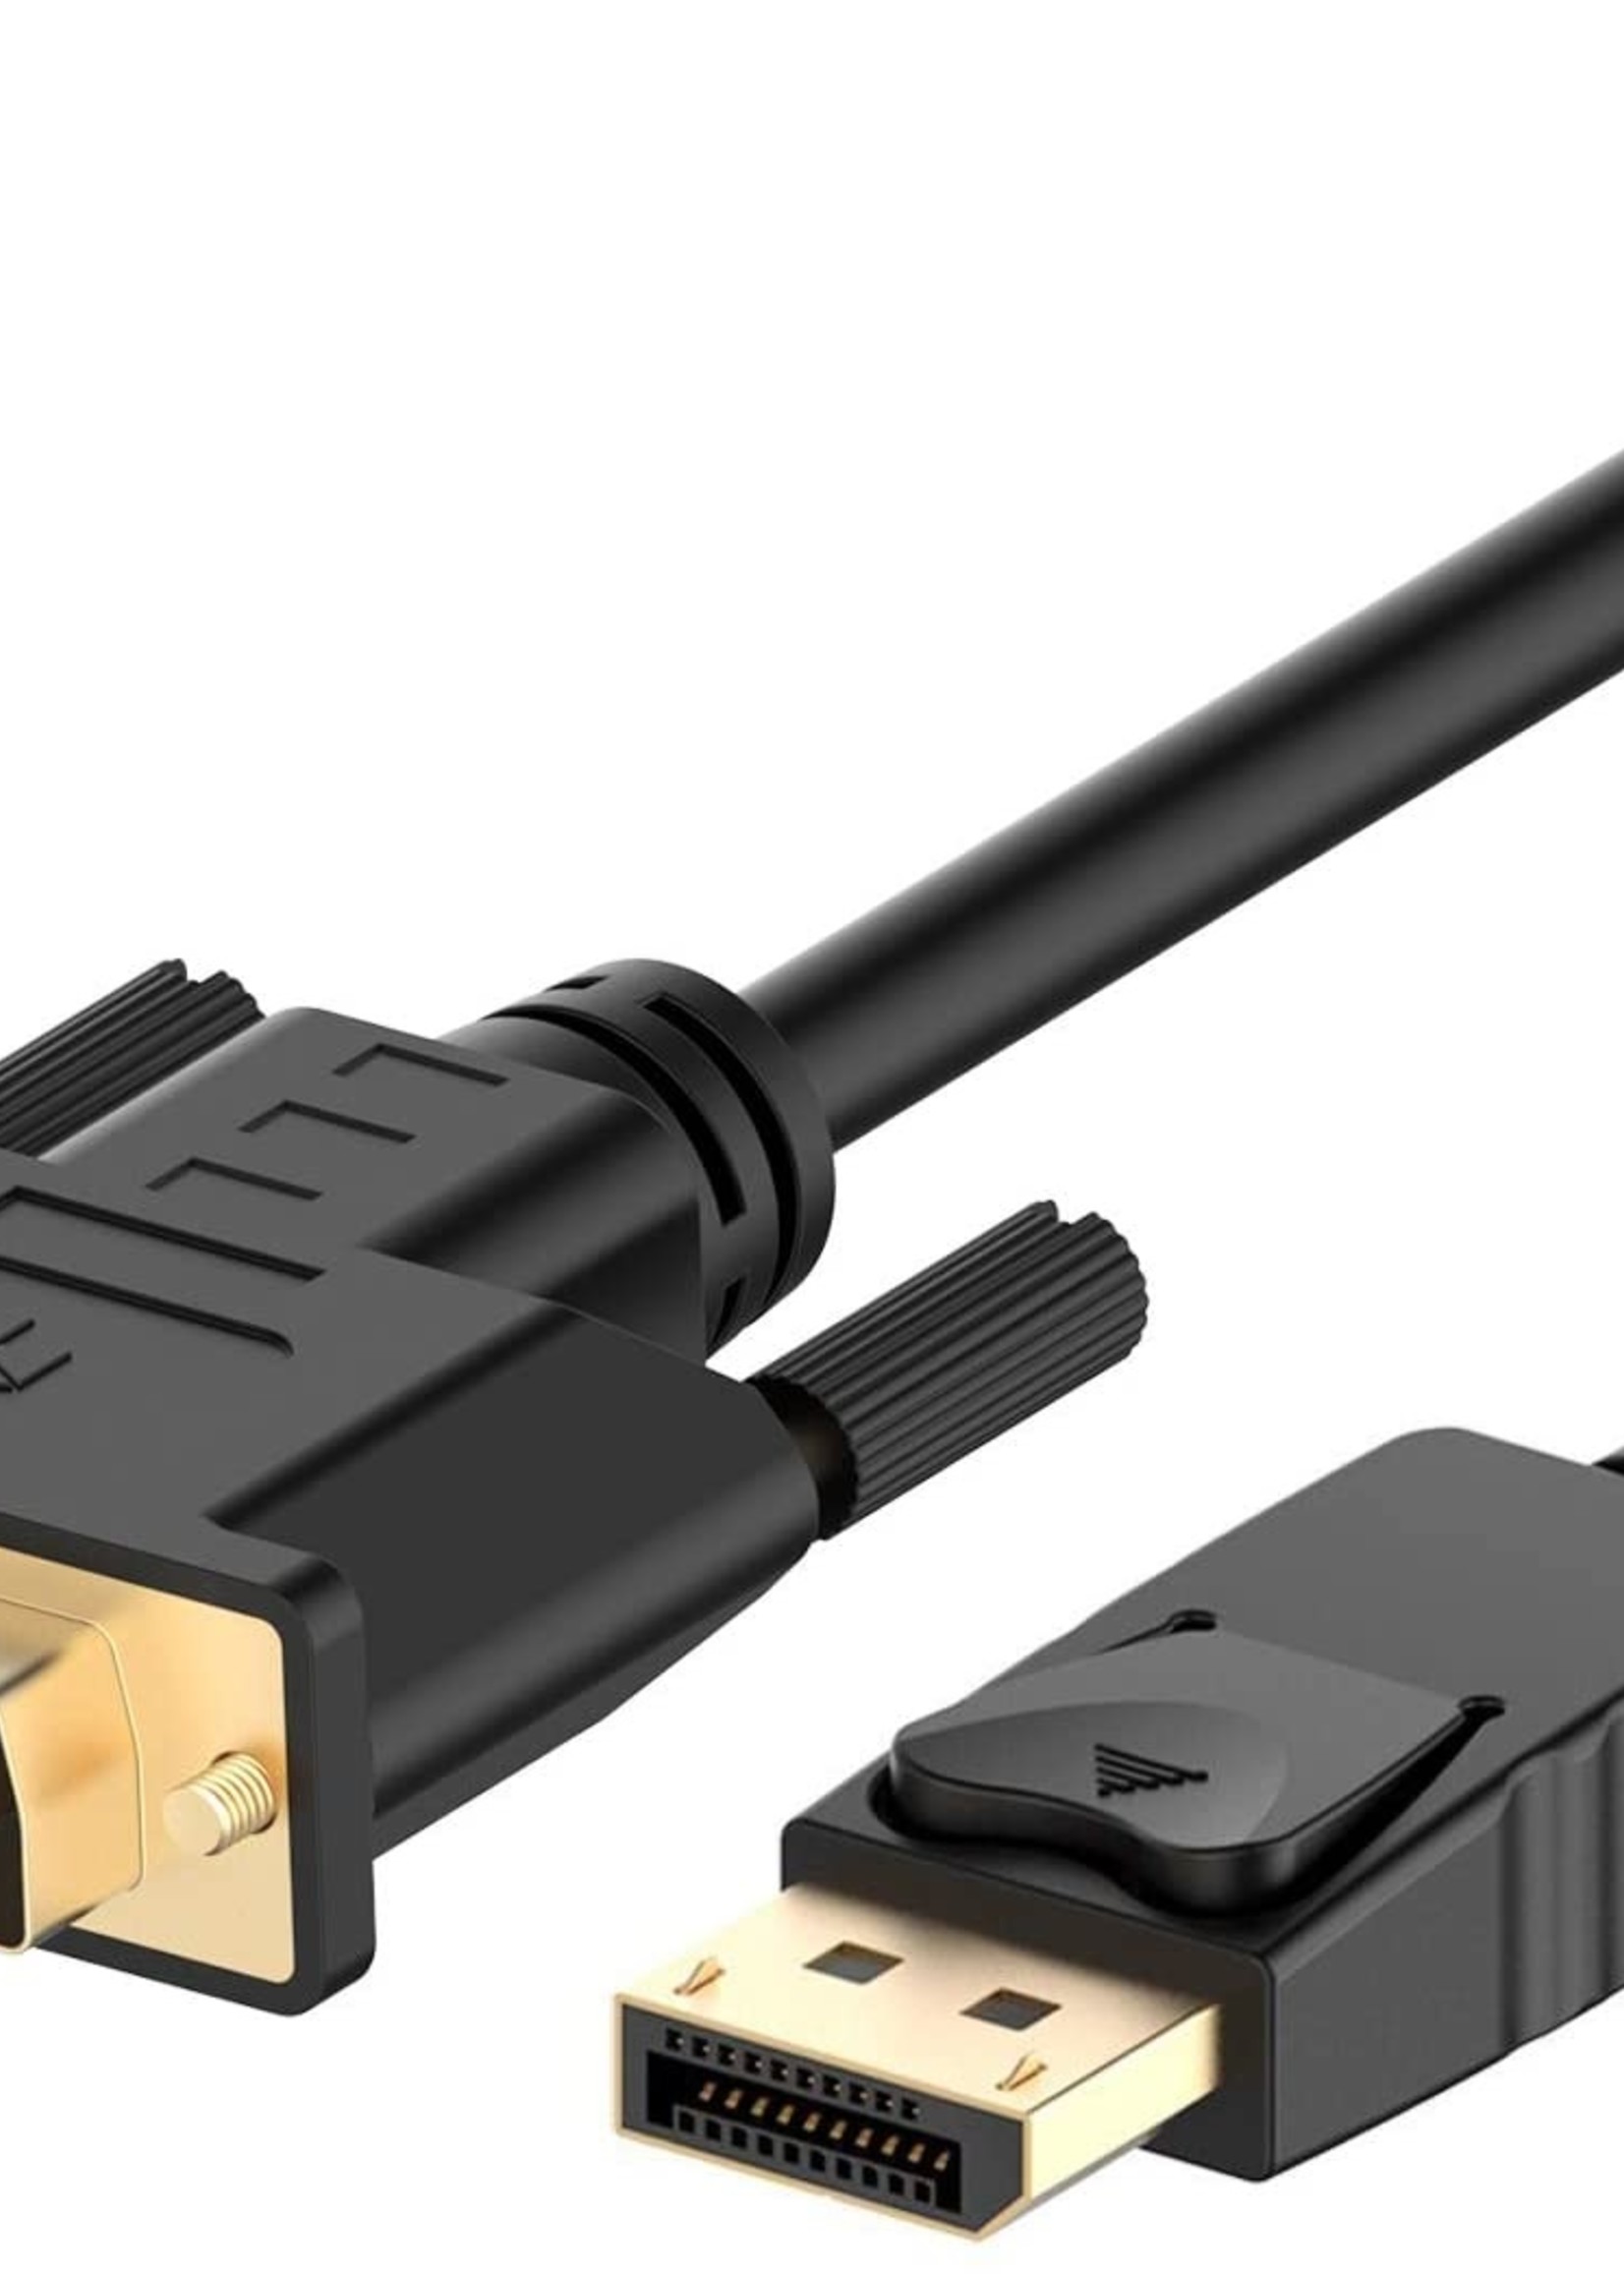 Misc 10' DisplayPort to DVI Cable, Gold Plated